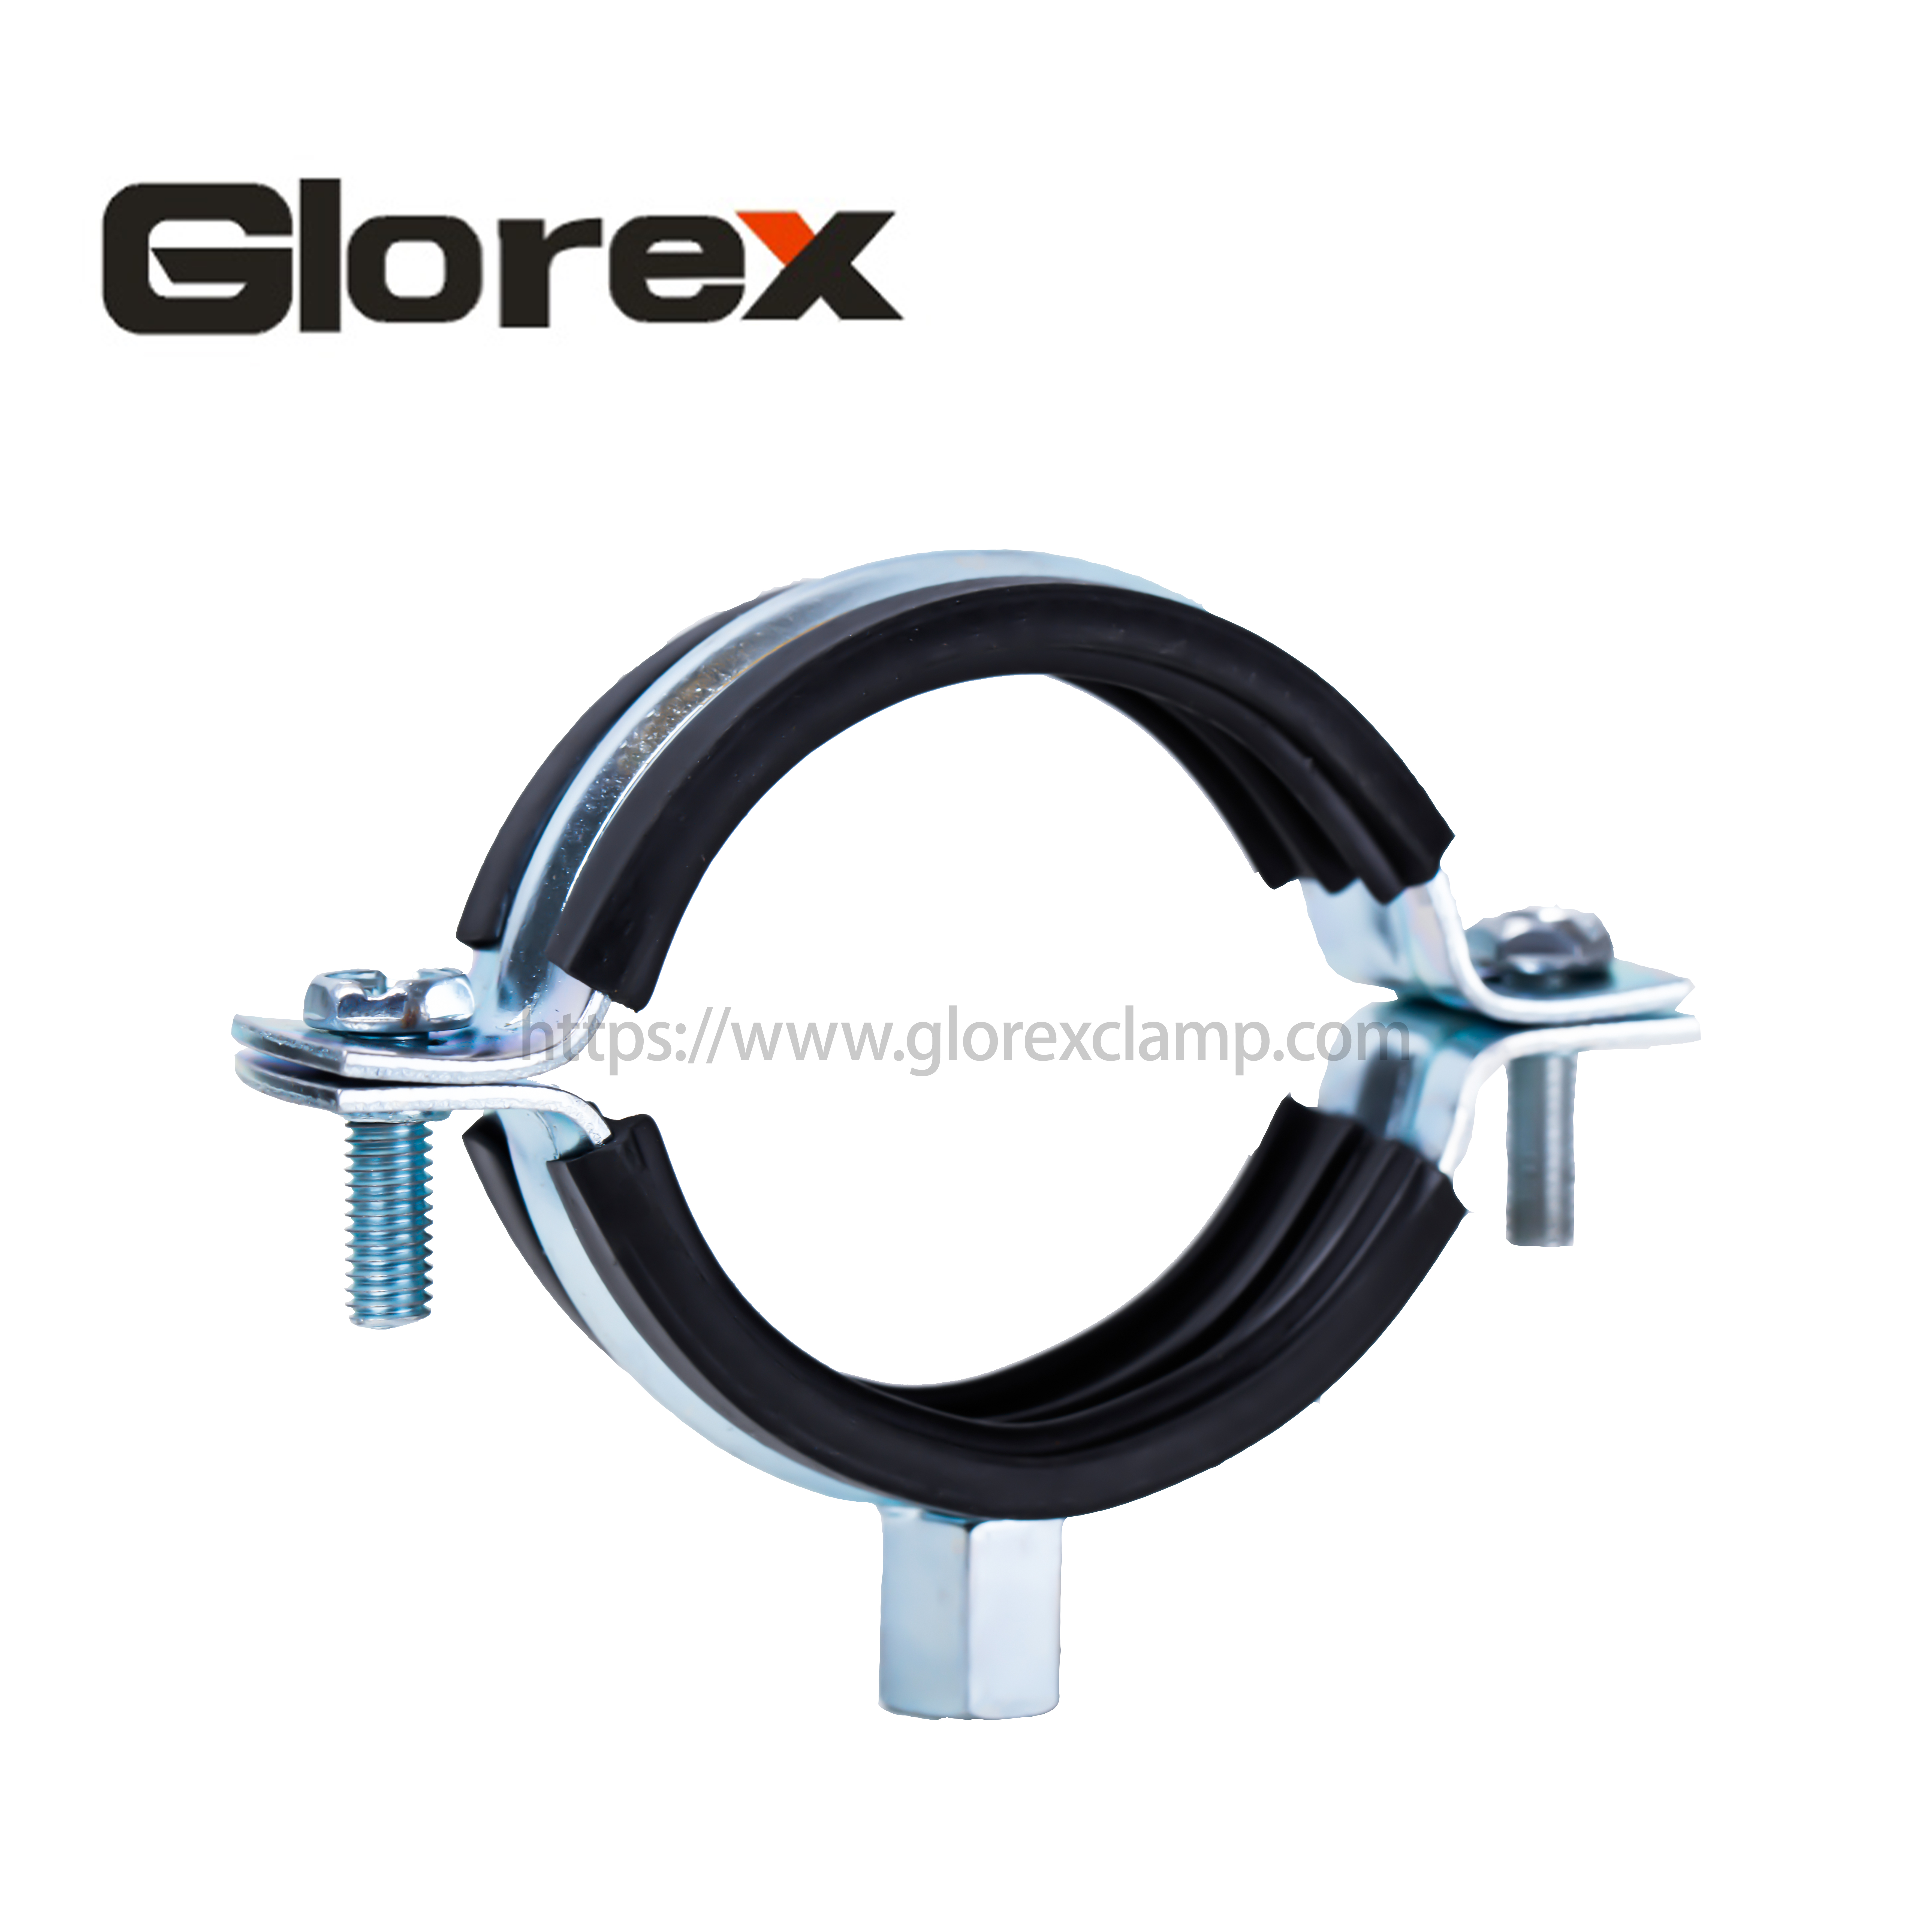 China Supplier Scaffolding Pipe Clamp - Heavy duy pipe clamp with rubber – Glorex Featured Image